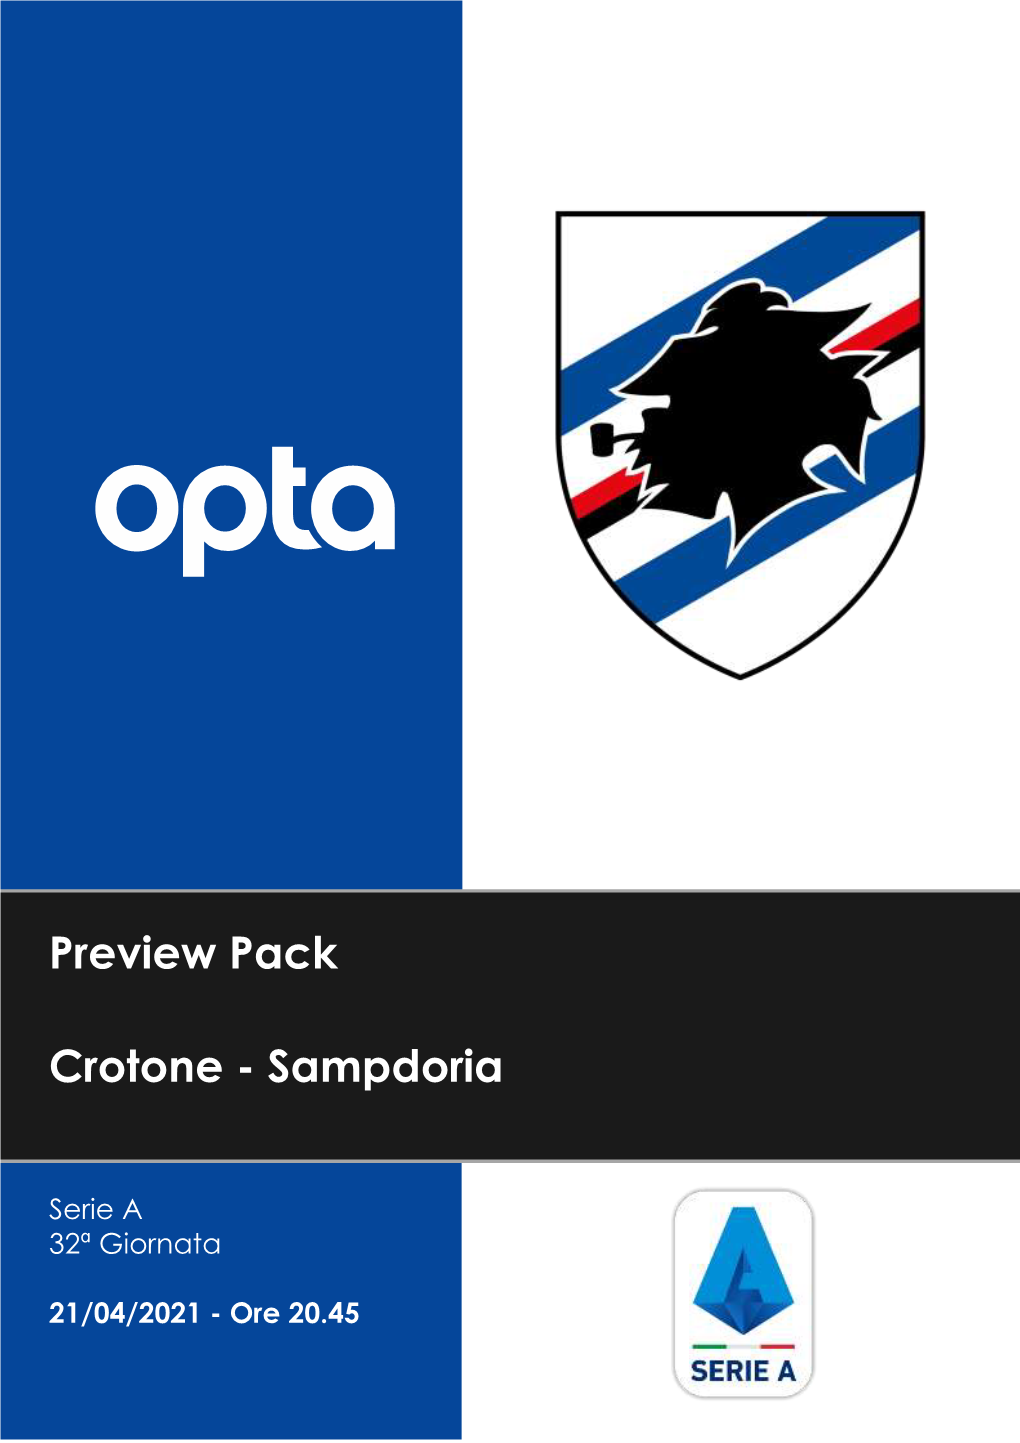 Preview Pack Crotone